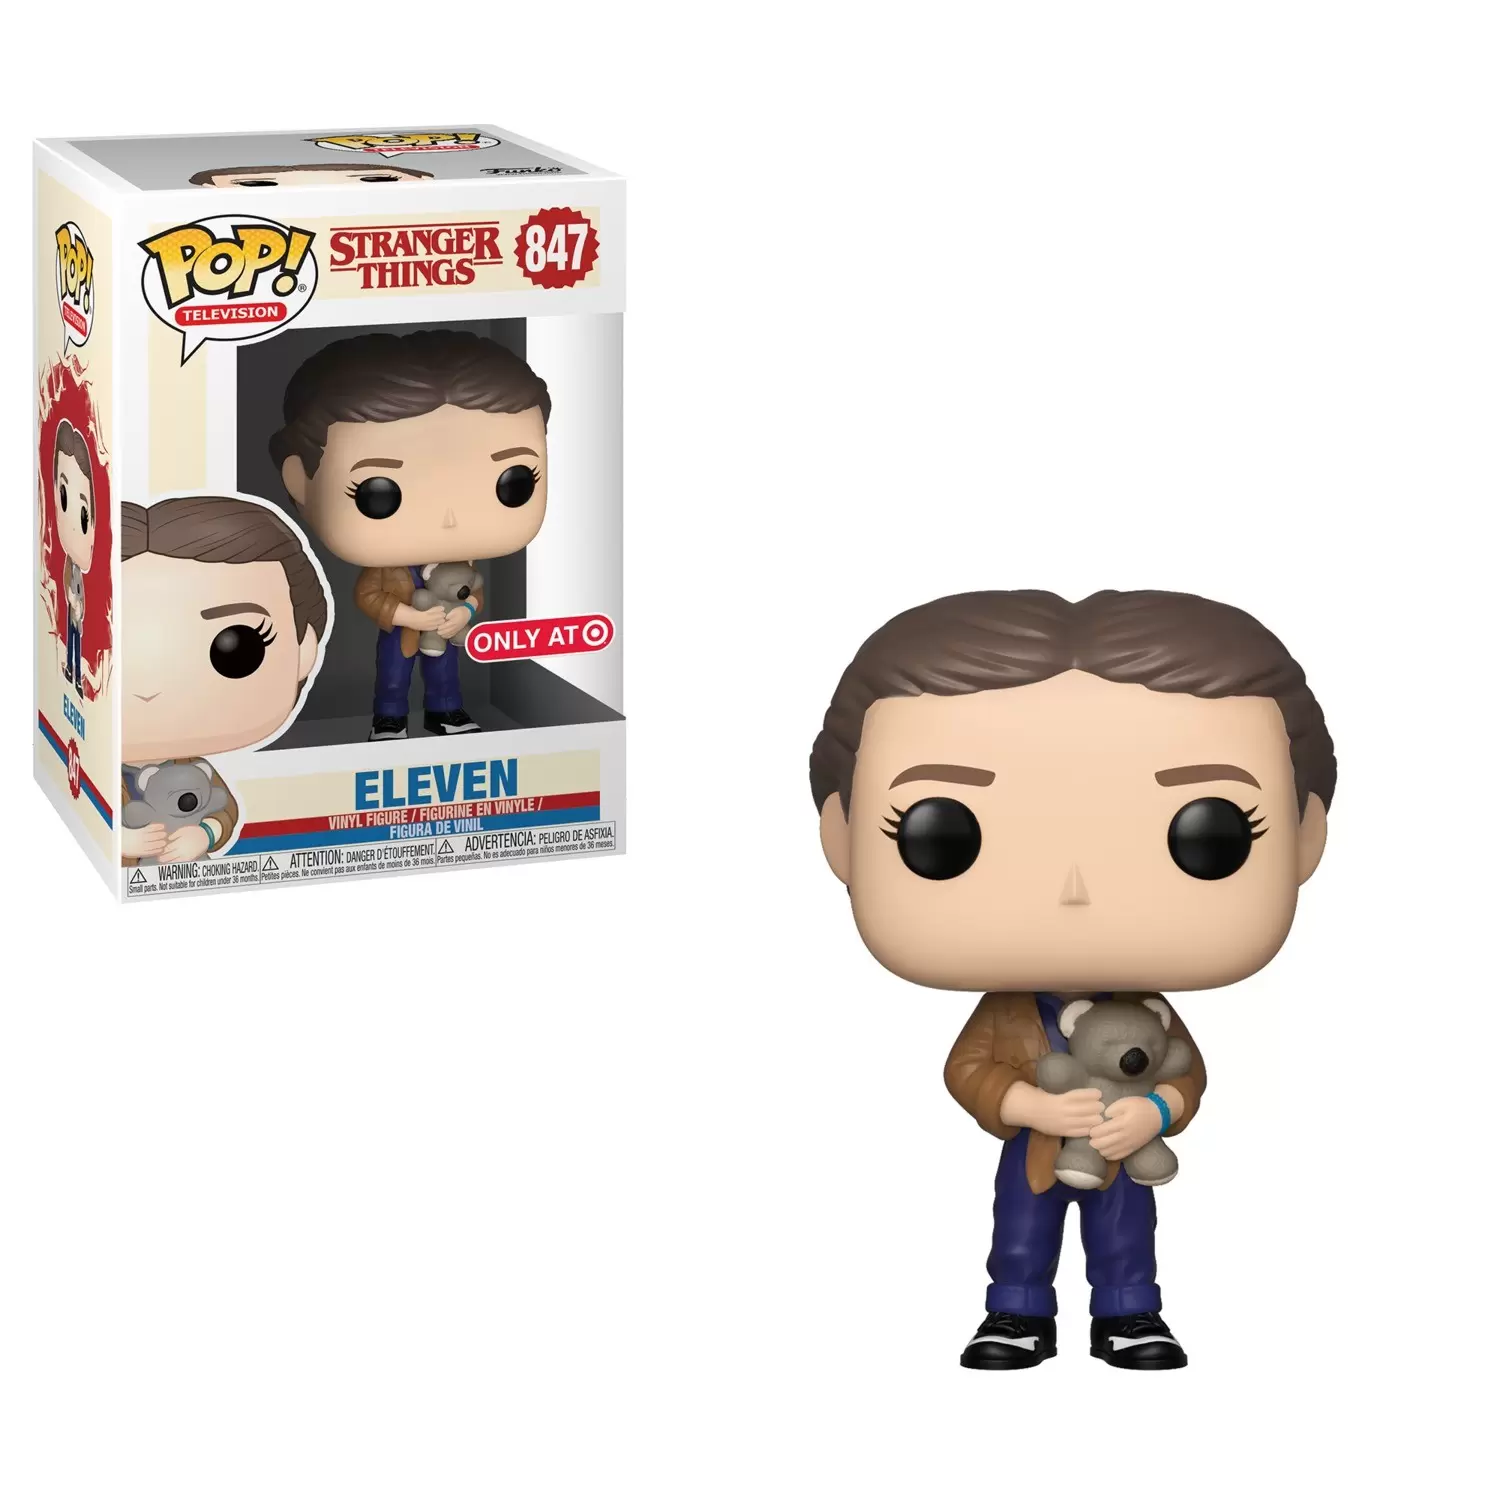 POP! Television - Stranger Things 3 - Eleven